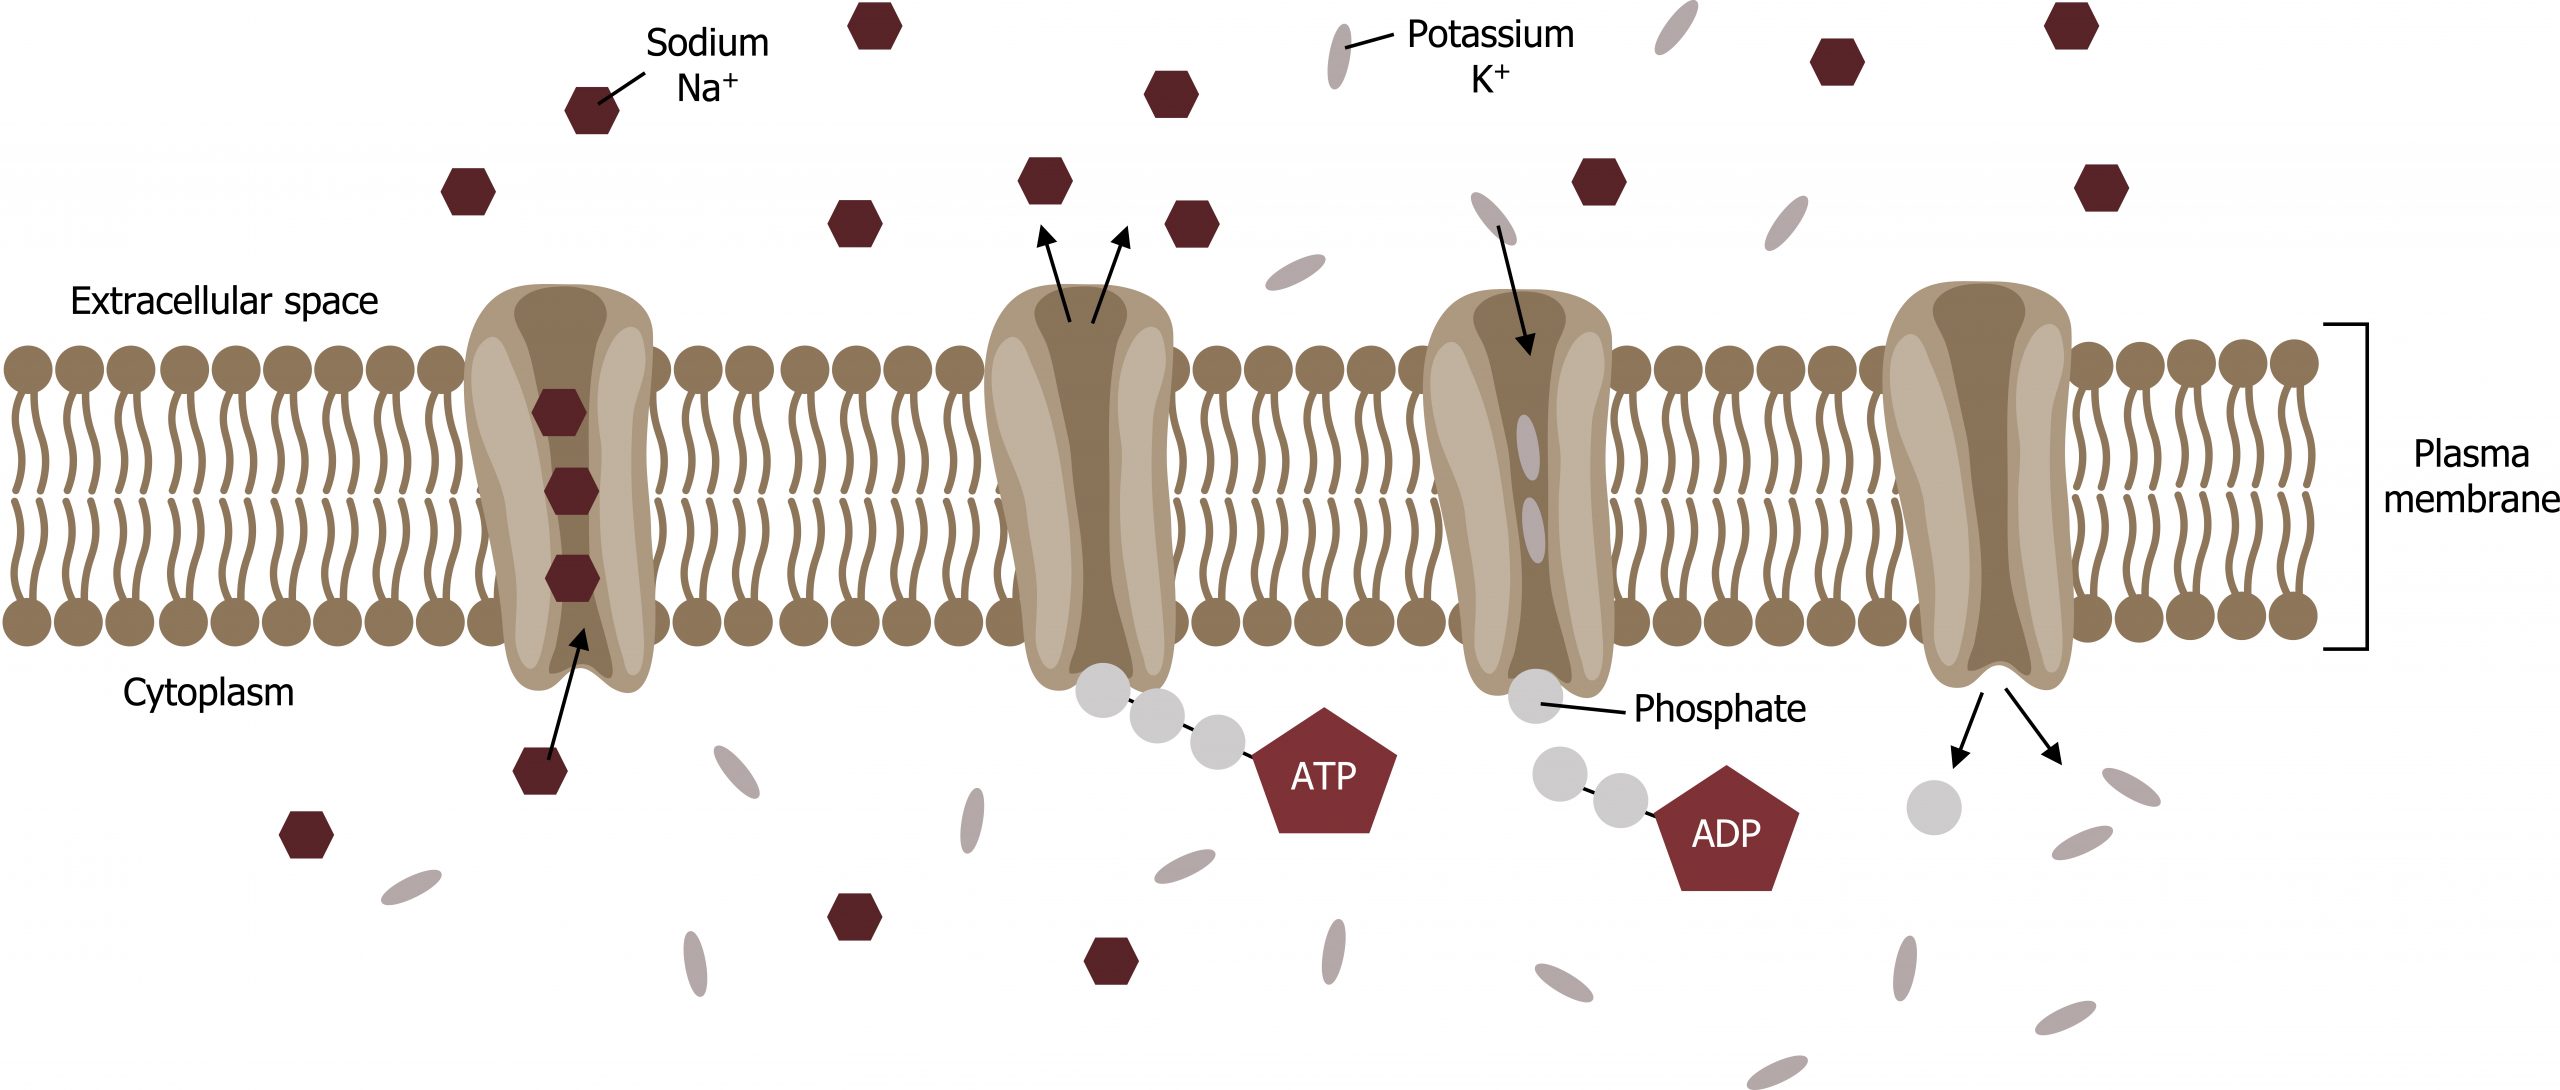 Plasma membrane separating extracellular fluid (top) from cytoplasm (bottom) with 4 Na+/K+ pumps. 1: Na+ moves up. 2: Na+ enters extracellular space and ATP binds on the cytoplasmic side. 3: A phosphate stays bound to the pump and ADP is released. K+ moves down. 4: K+ enters the cytoplasm.